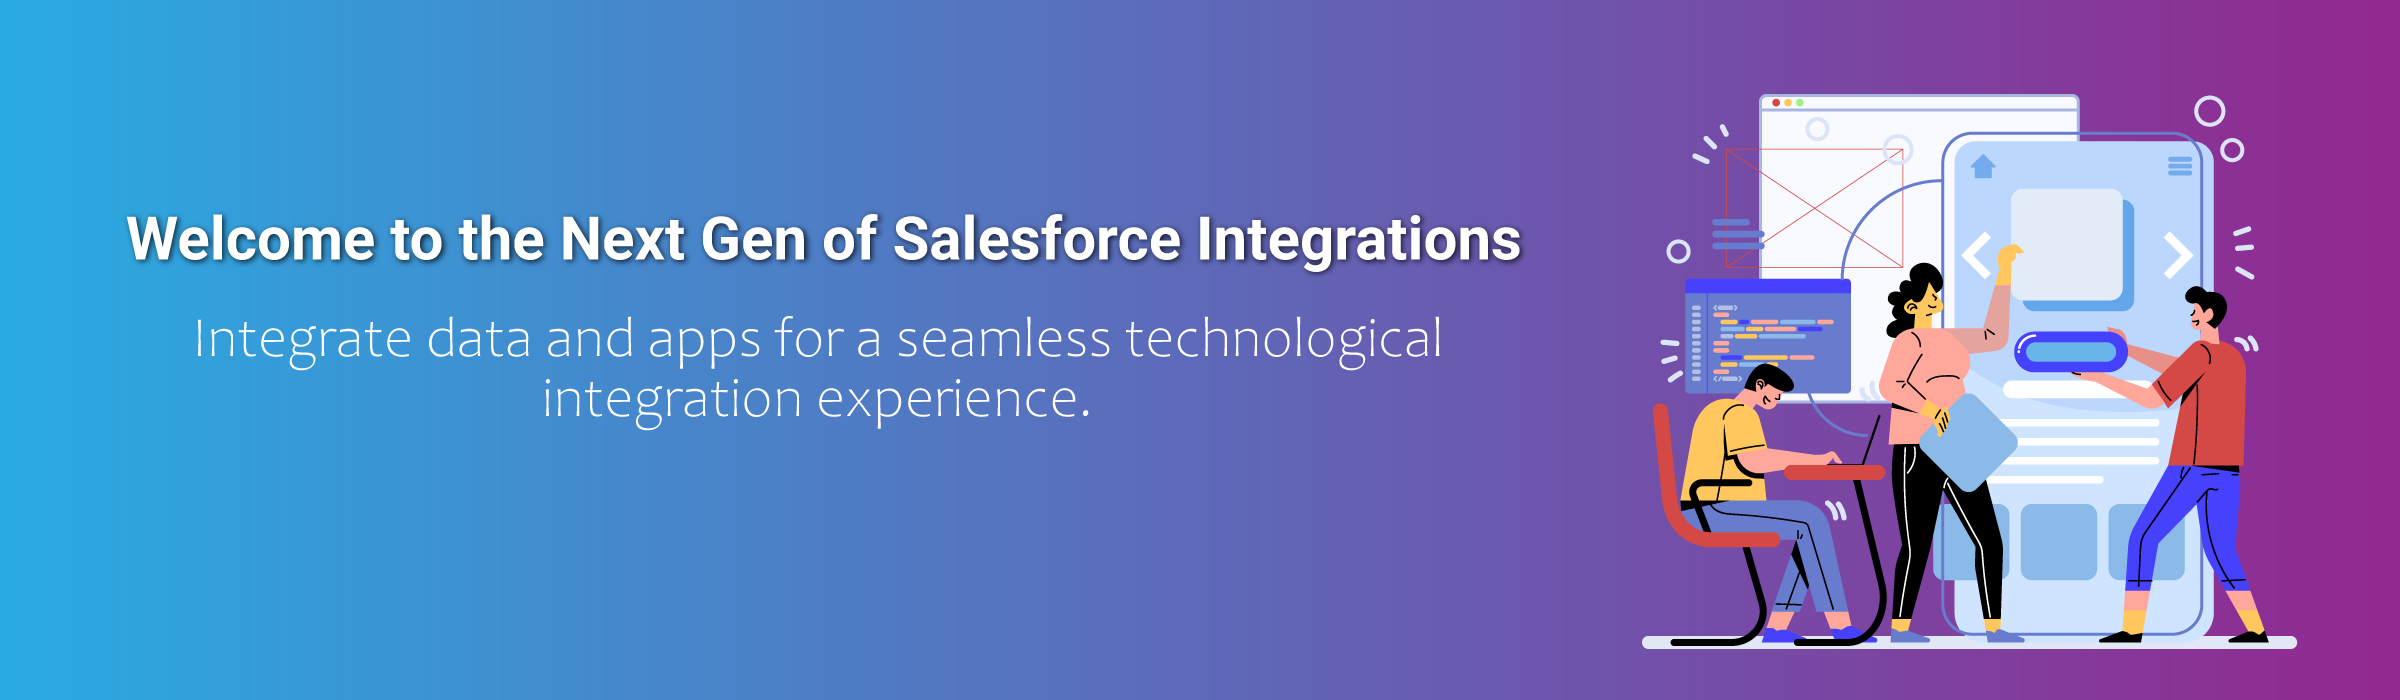 Integrate-data-and-apps-for-a-seamless-technological-integration-experience.